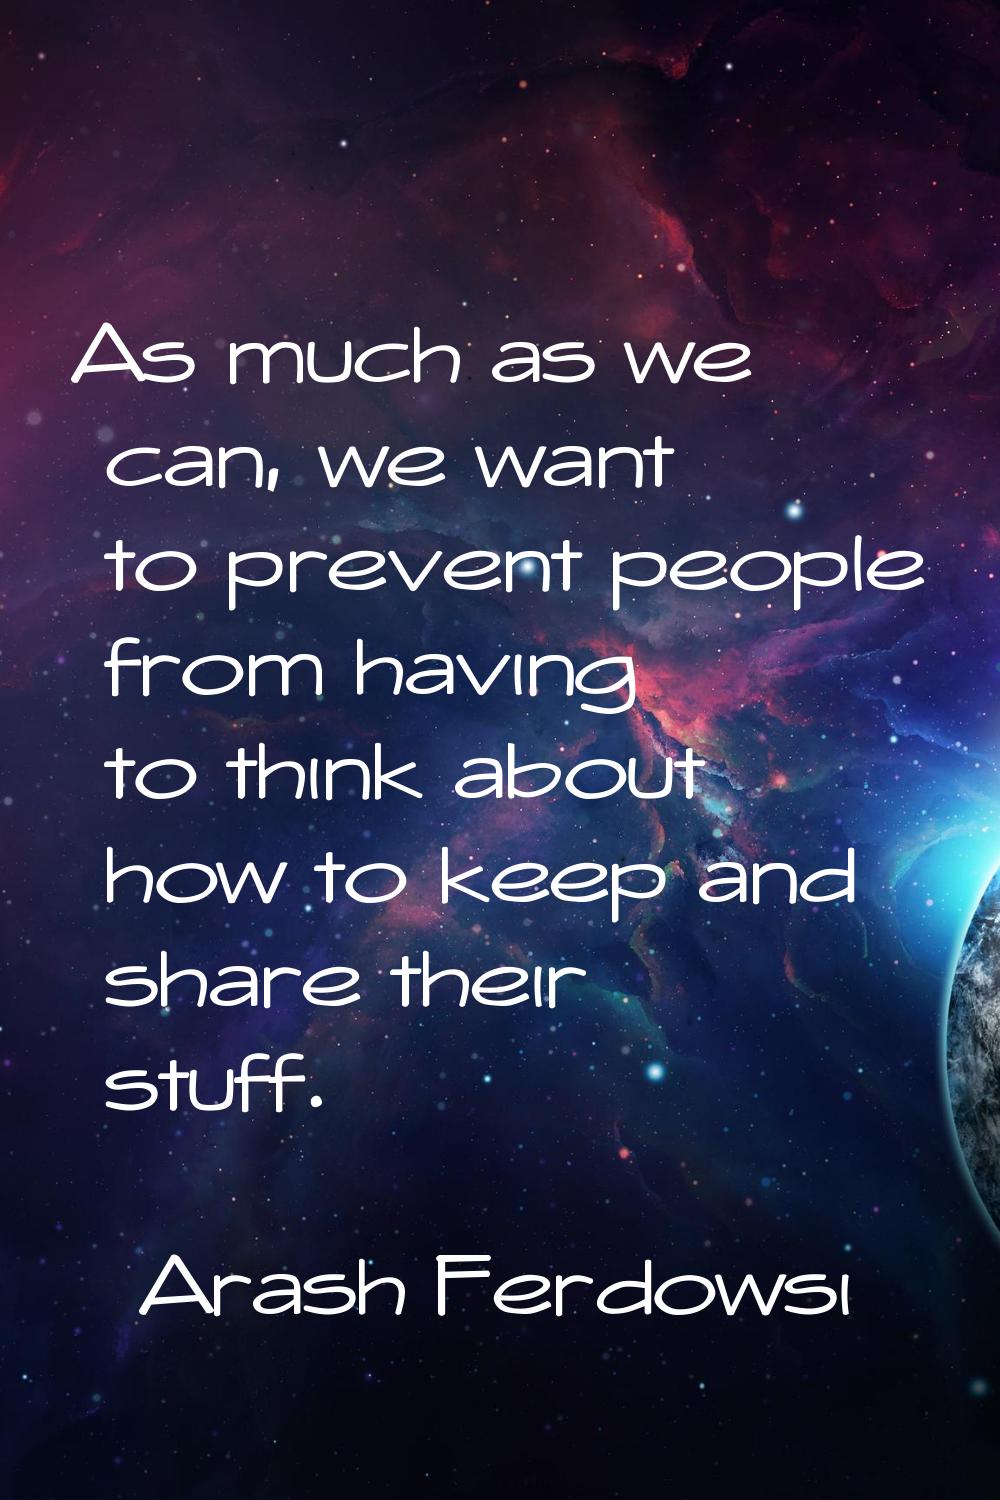 As much as we can, we want to prevent people from having to think about how to keep and share their